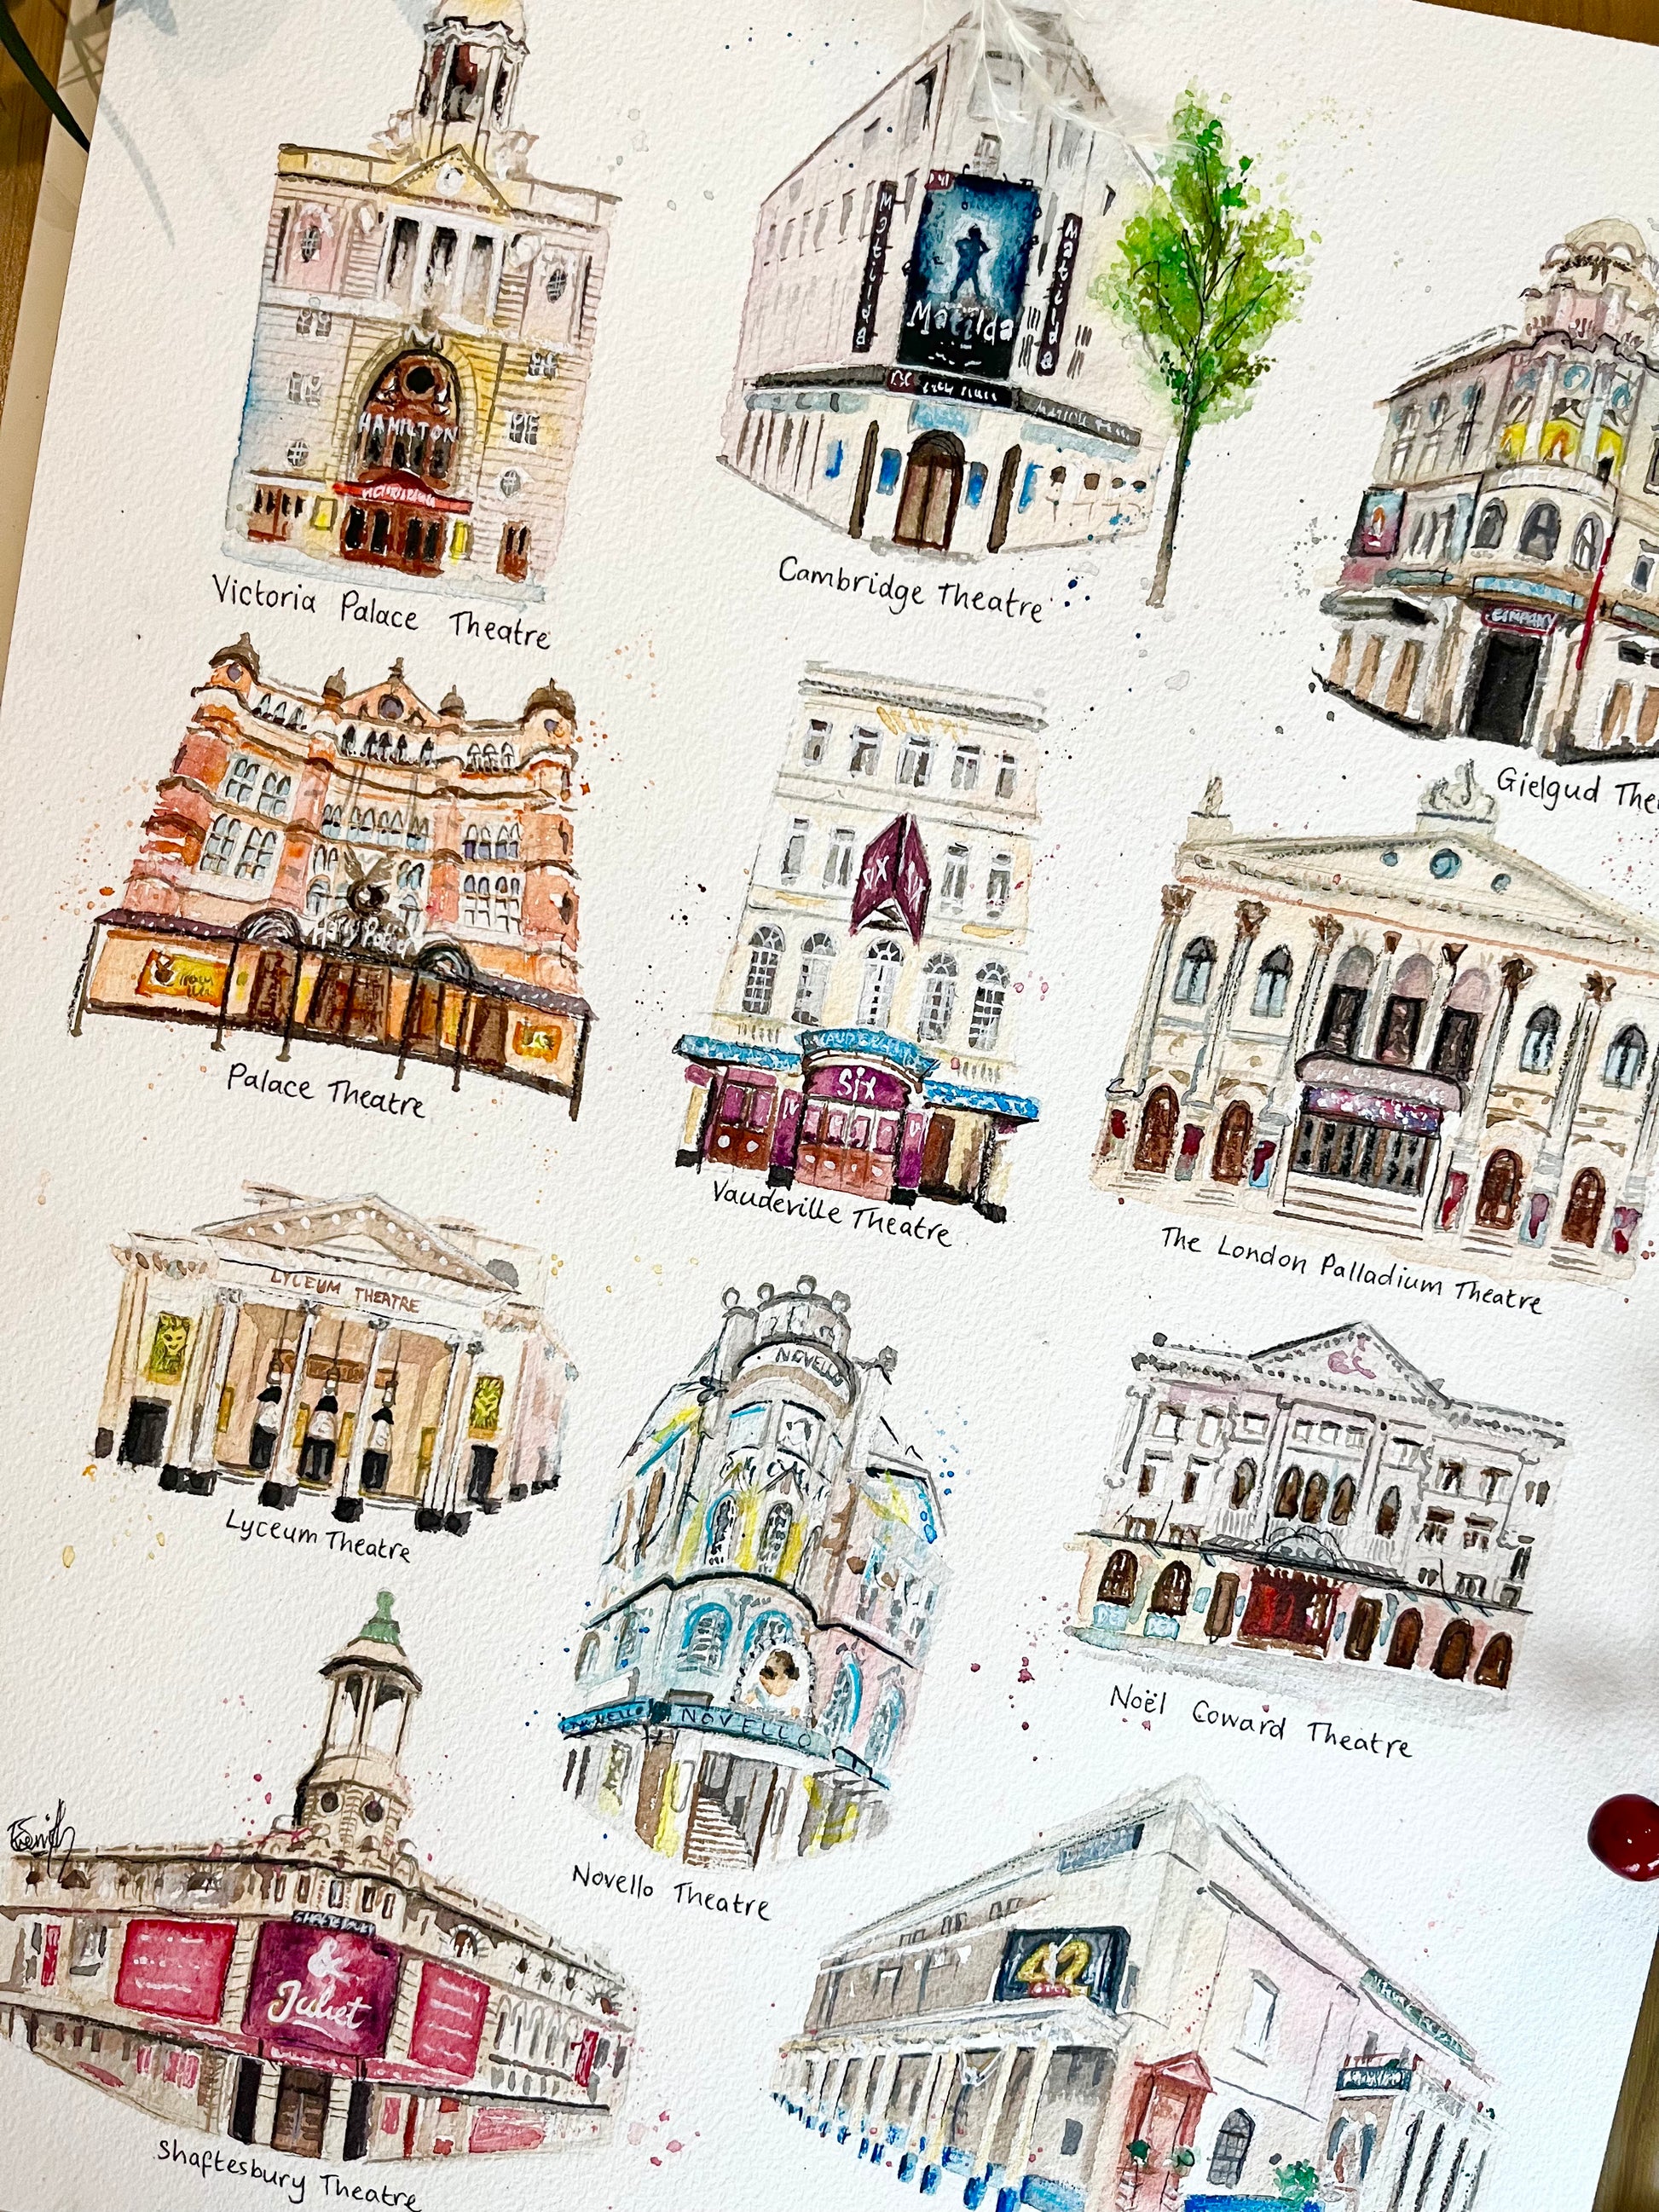 Watercolour illustrations of West End Theatres in London by local artist and performer, Eve Leoni Smith.